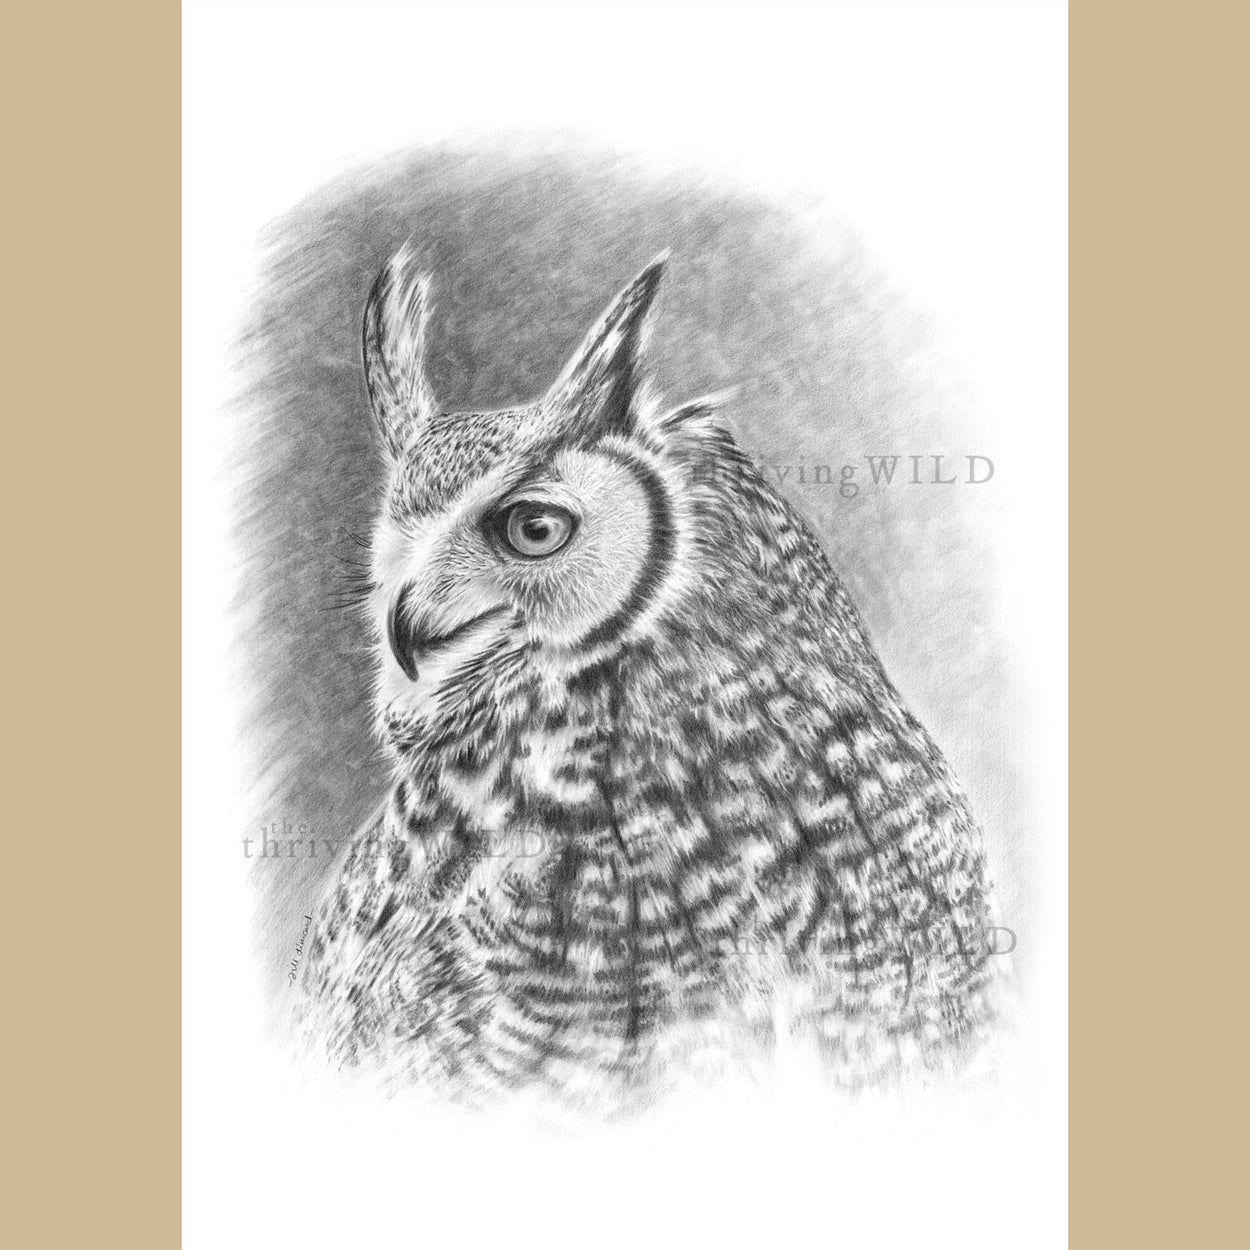 Bubo Virginianus Pencil Drawing Great Horned Owl - The Thriving Wild - Jill Dimond